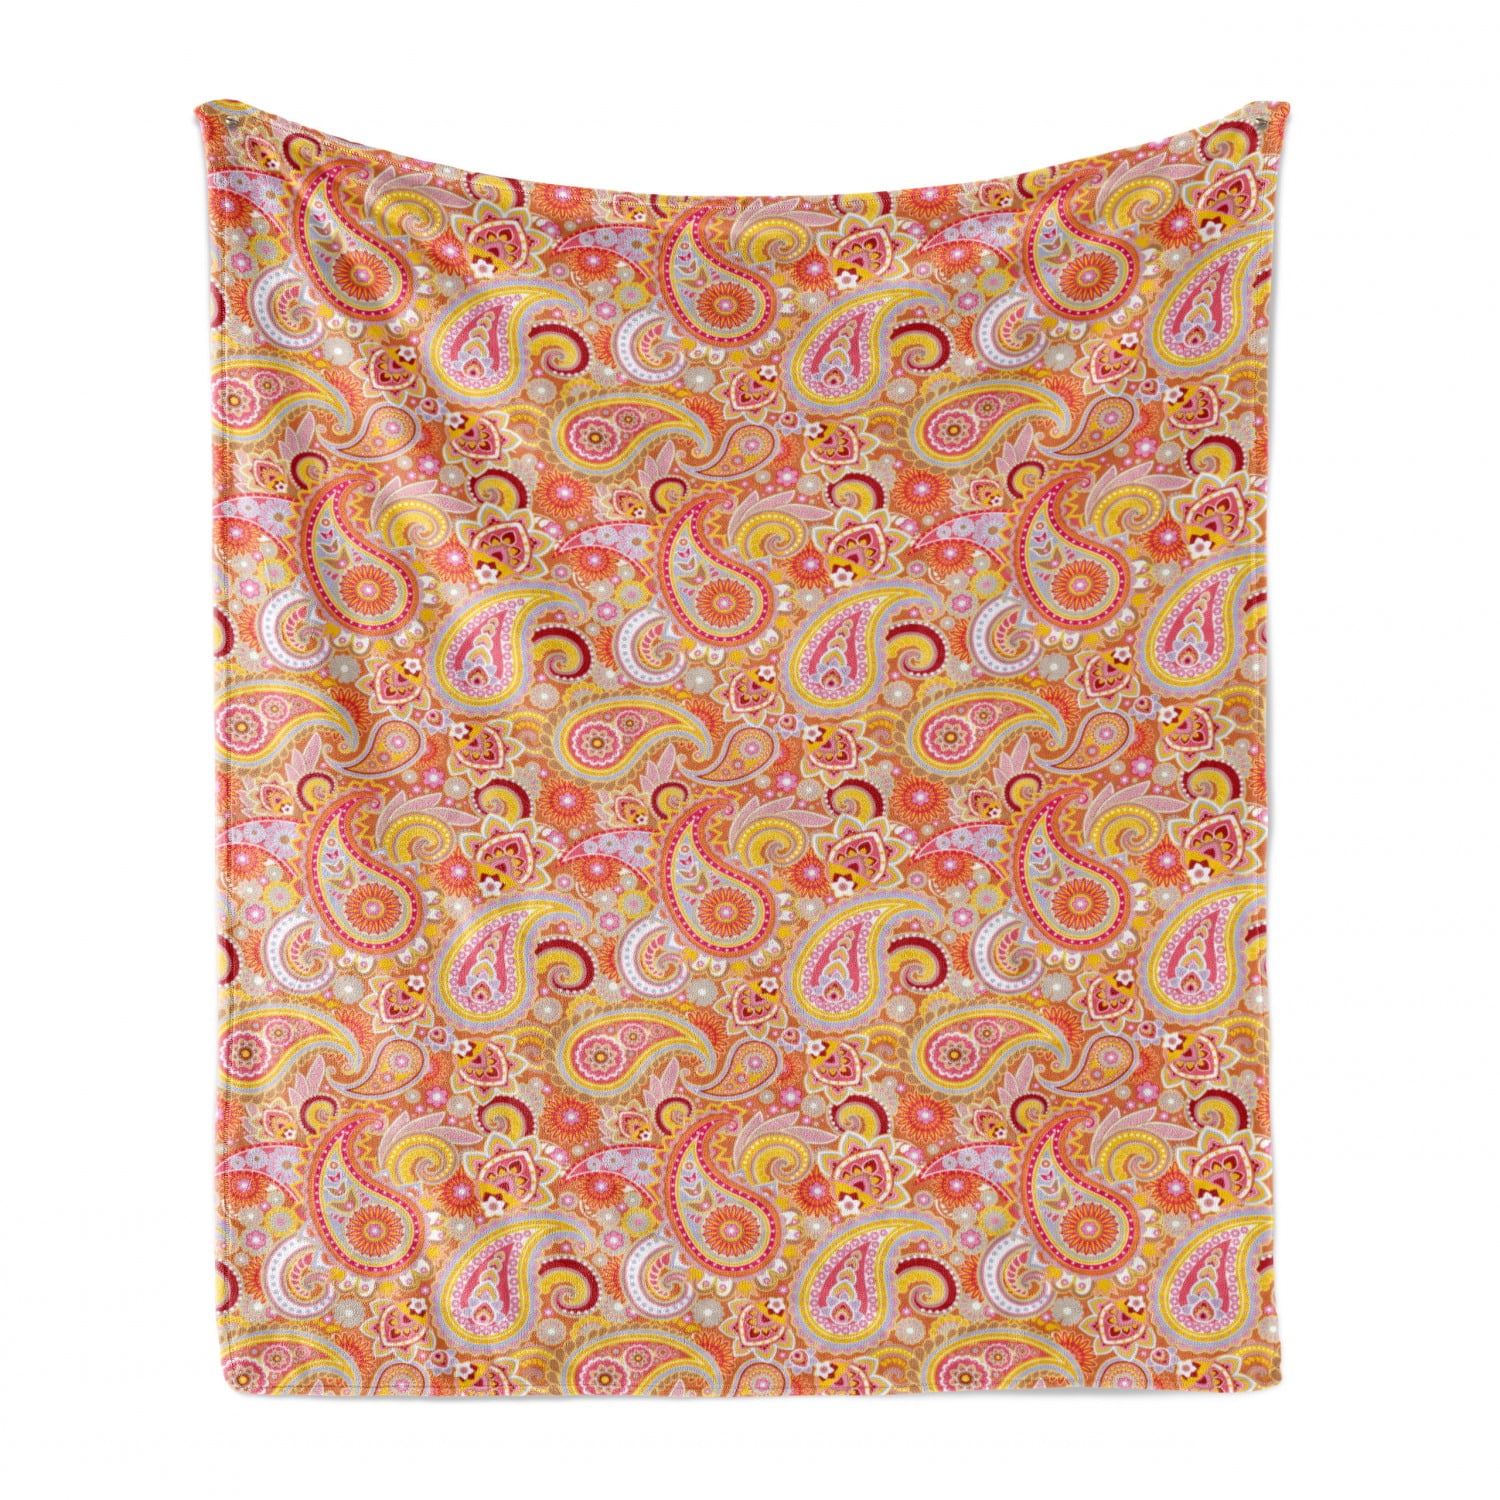 60 x 80 Ambesonne Orange Soft Flannel Fleece Throw Blanket Design Elements Traditional Paisley Floral Pattern Swirls Leaves Motif Multicolor Cozy Plush for Indoor and Outdoor Use 